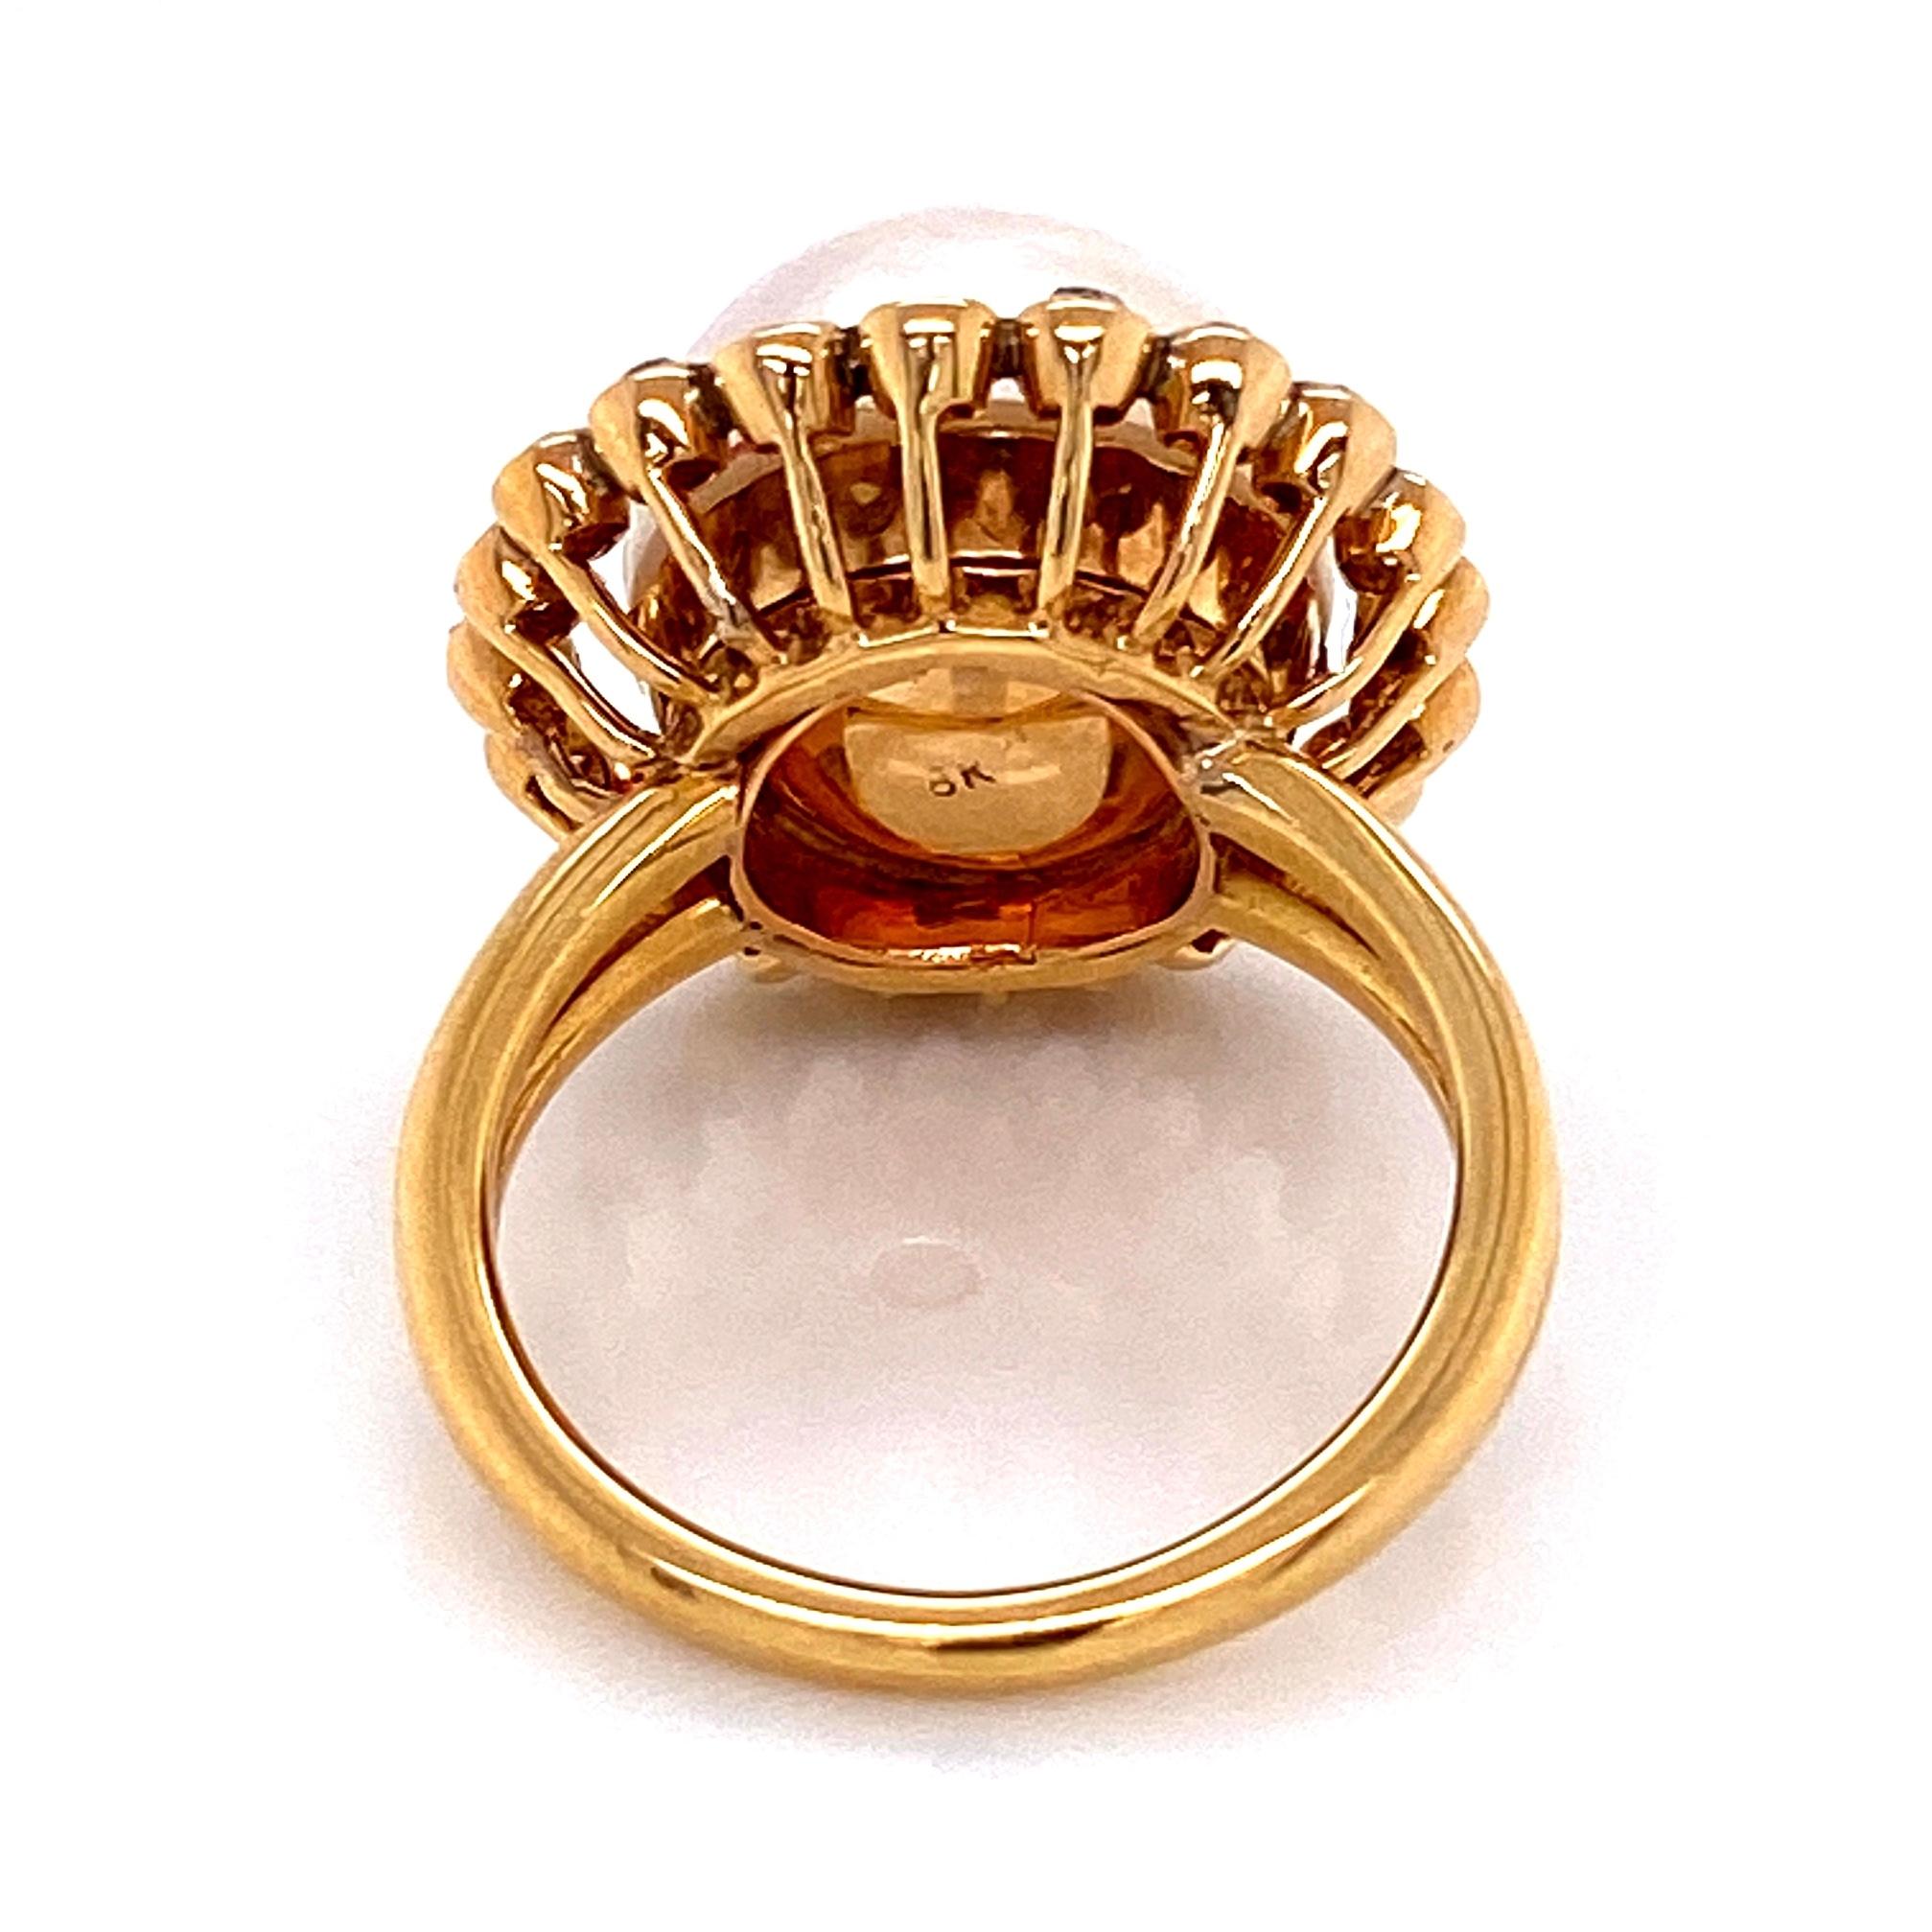 Pearl and Old European Diamond Victorian Gold Ring Estate Fine Jewelry 1